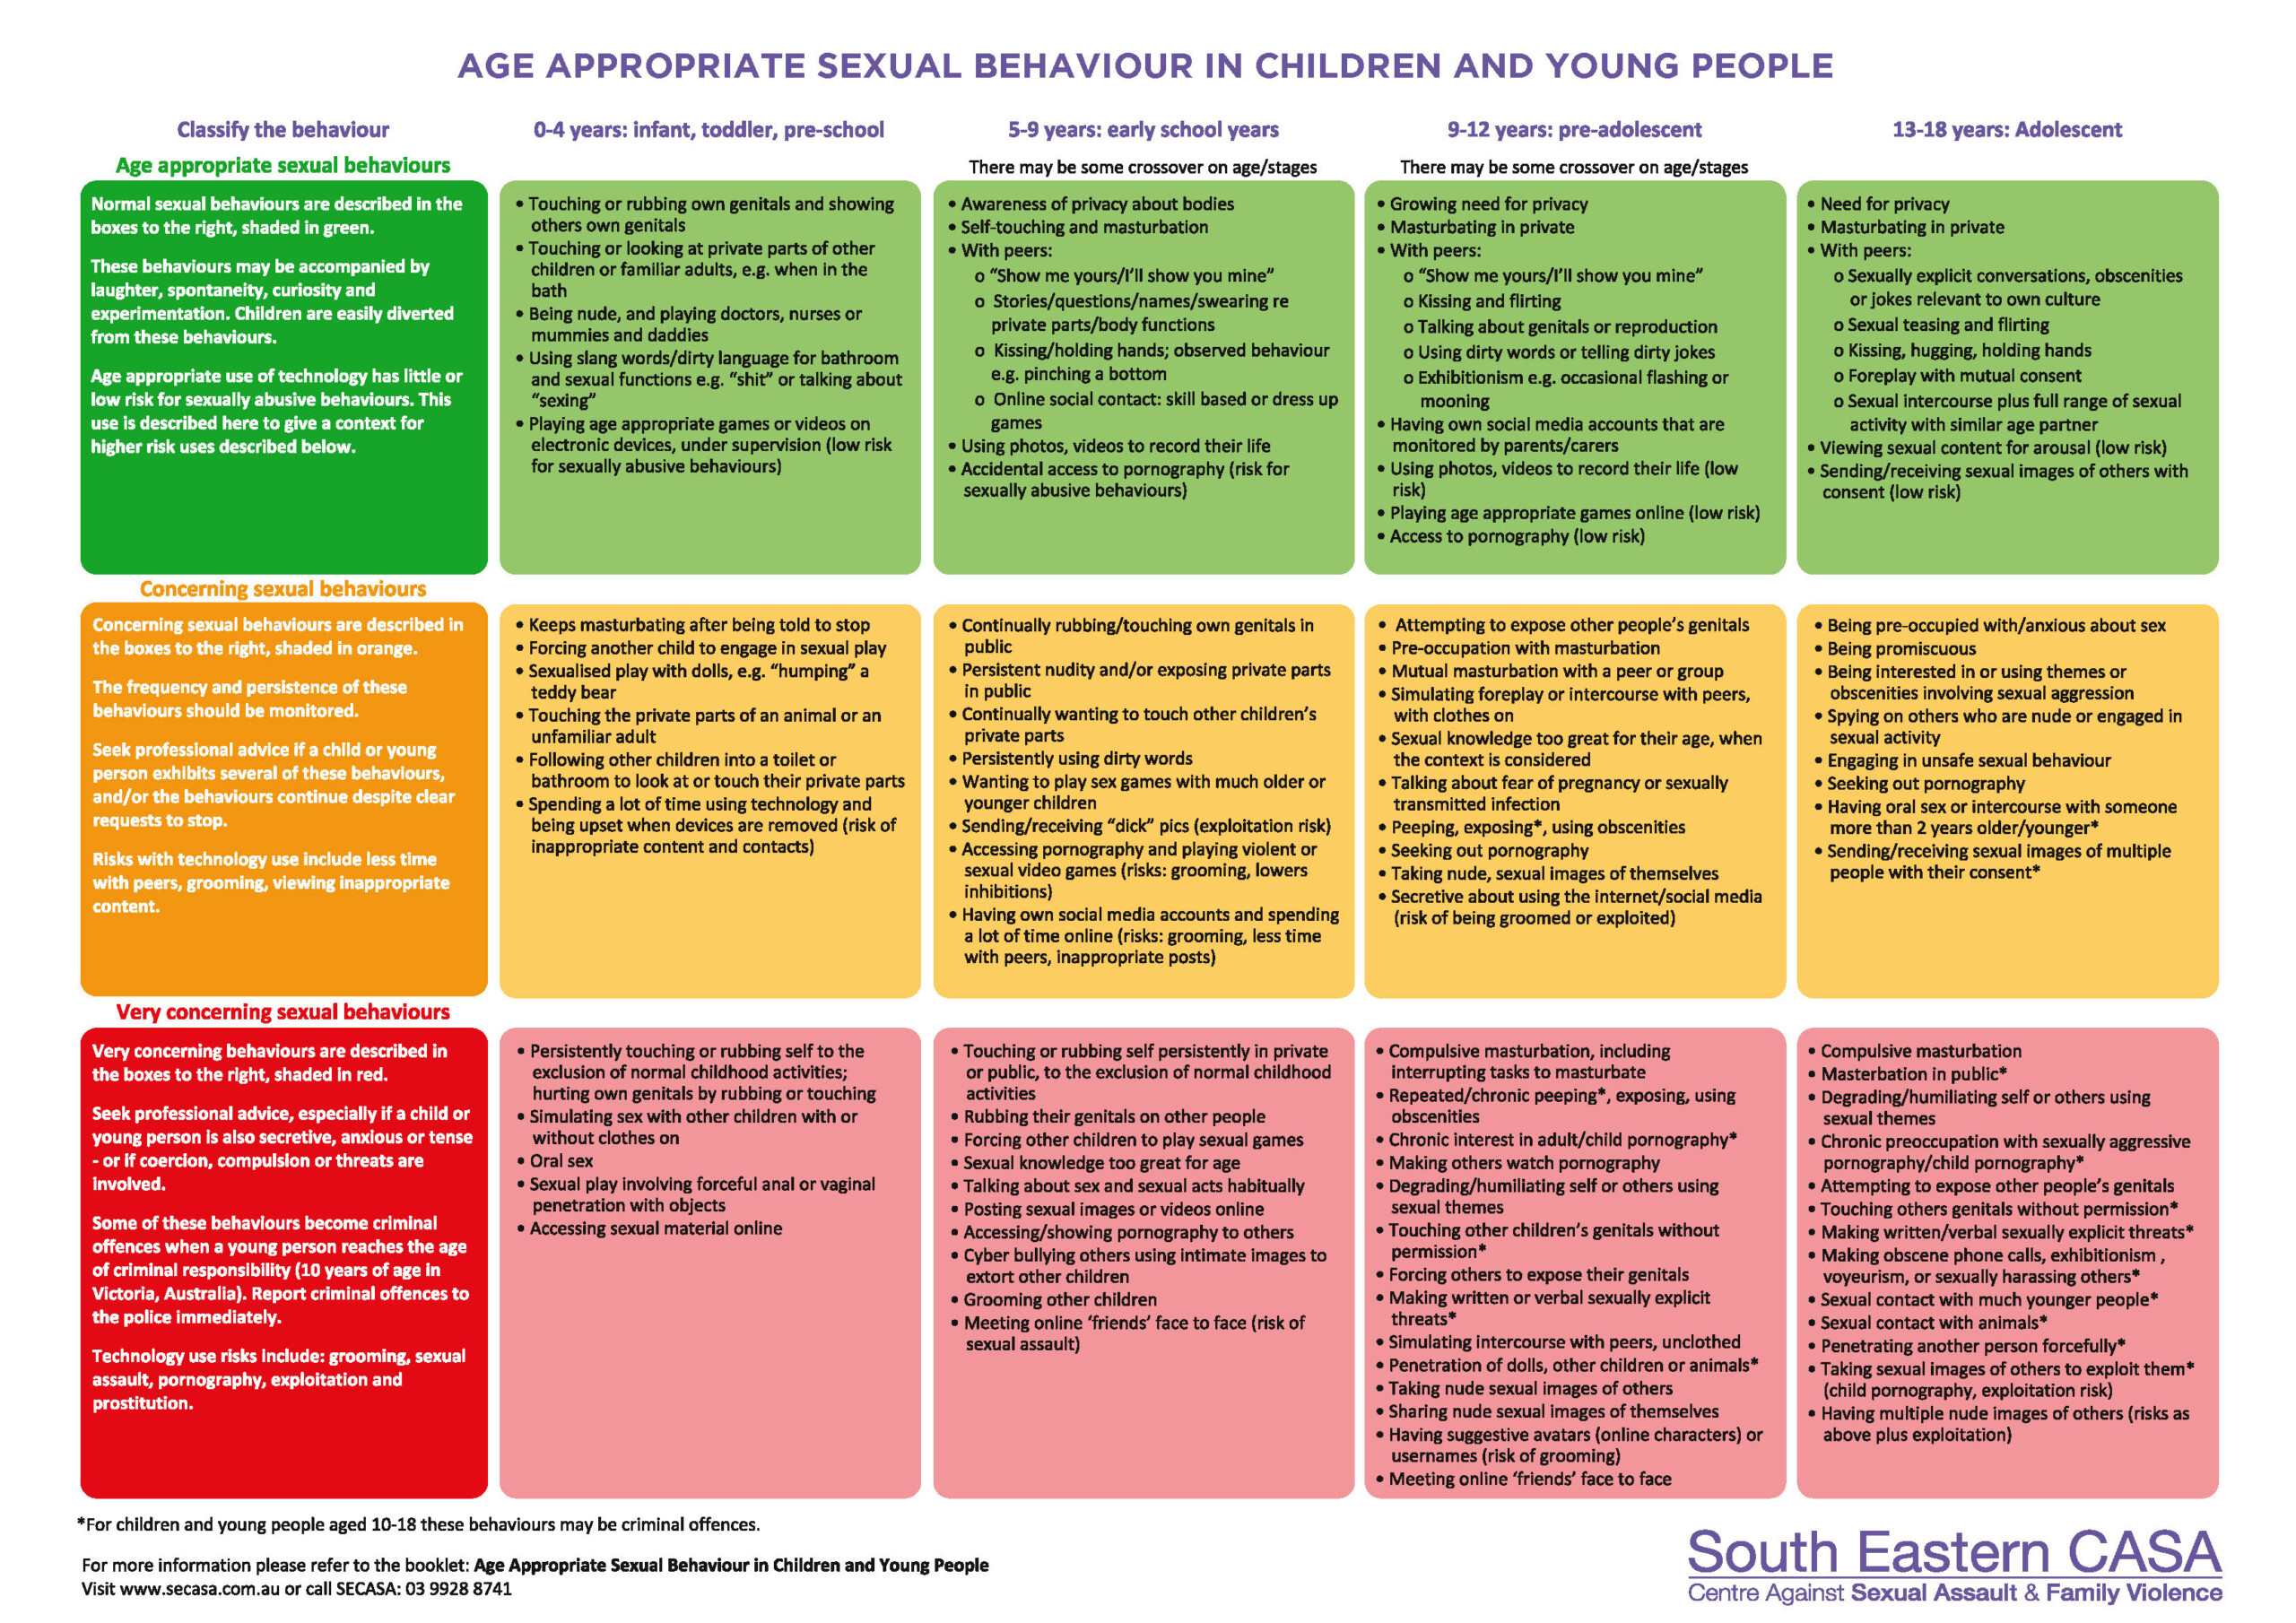 Age Appropriate Sexual Behaviours In Children And Young People The